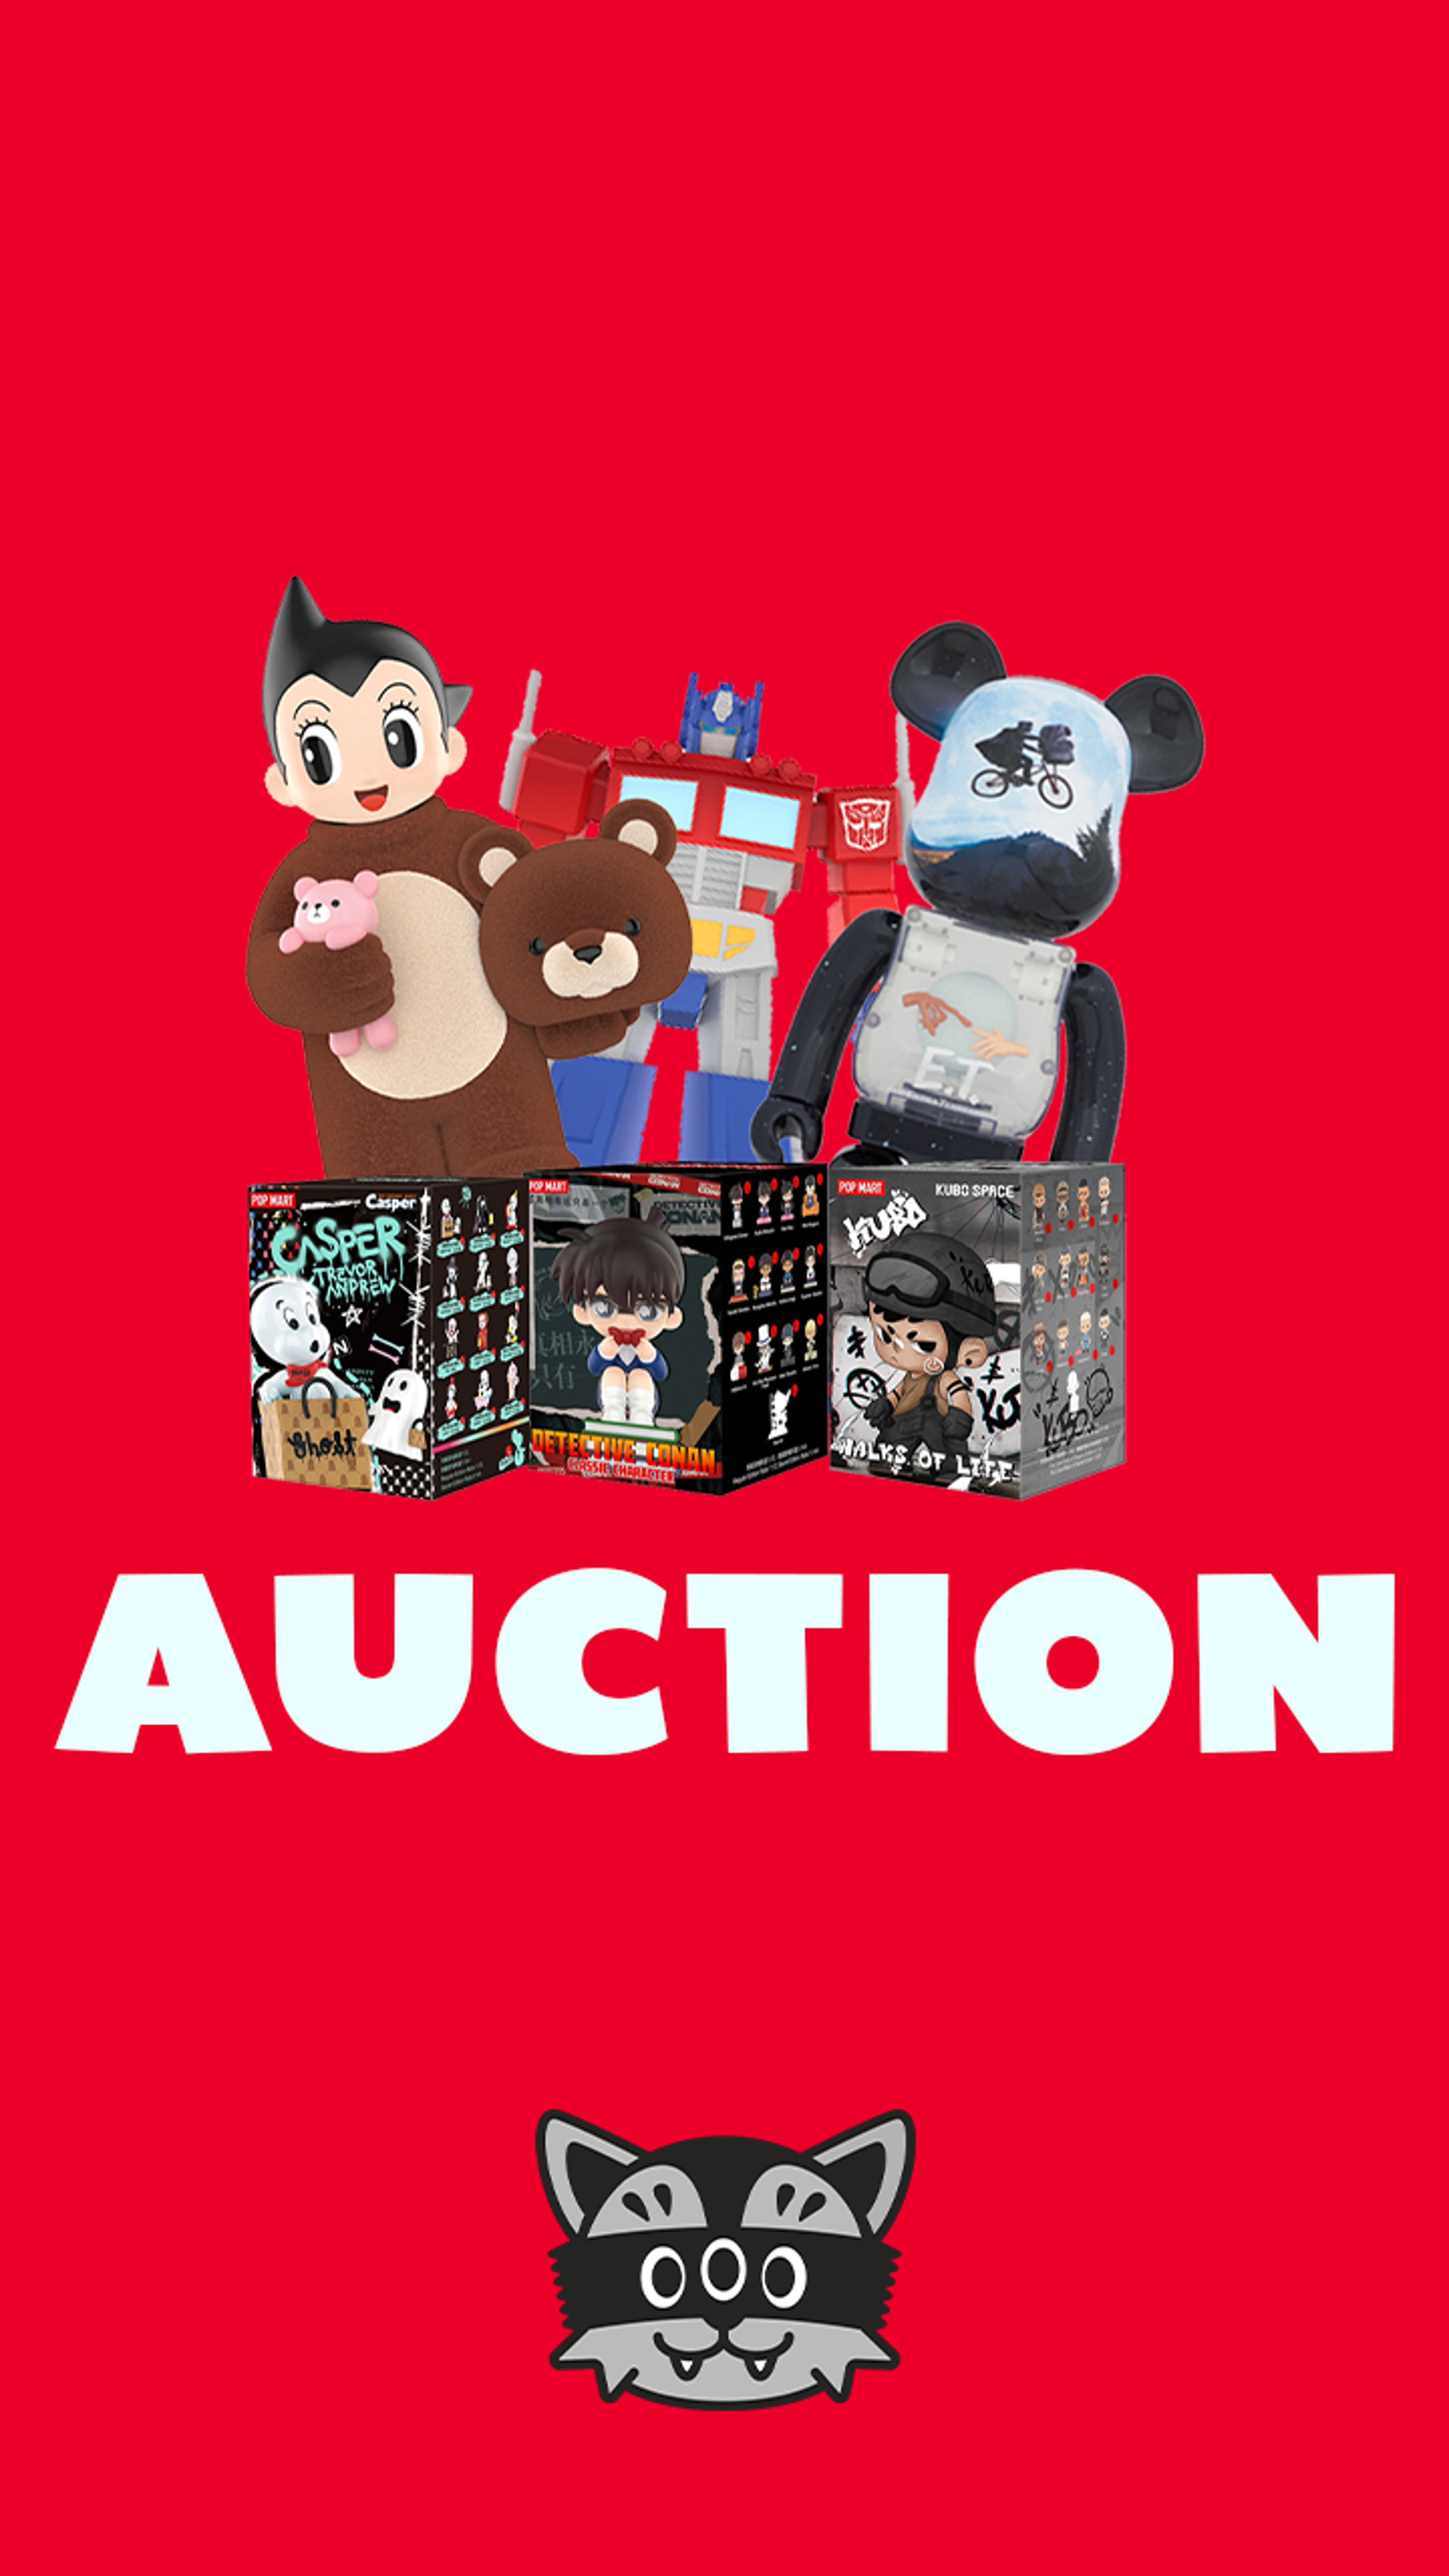 Preview image for the show titled "Mindzai Auction - April 19" at Today @ 5:00 PM